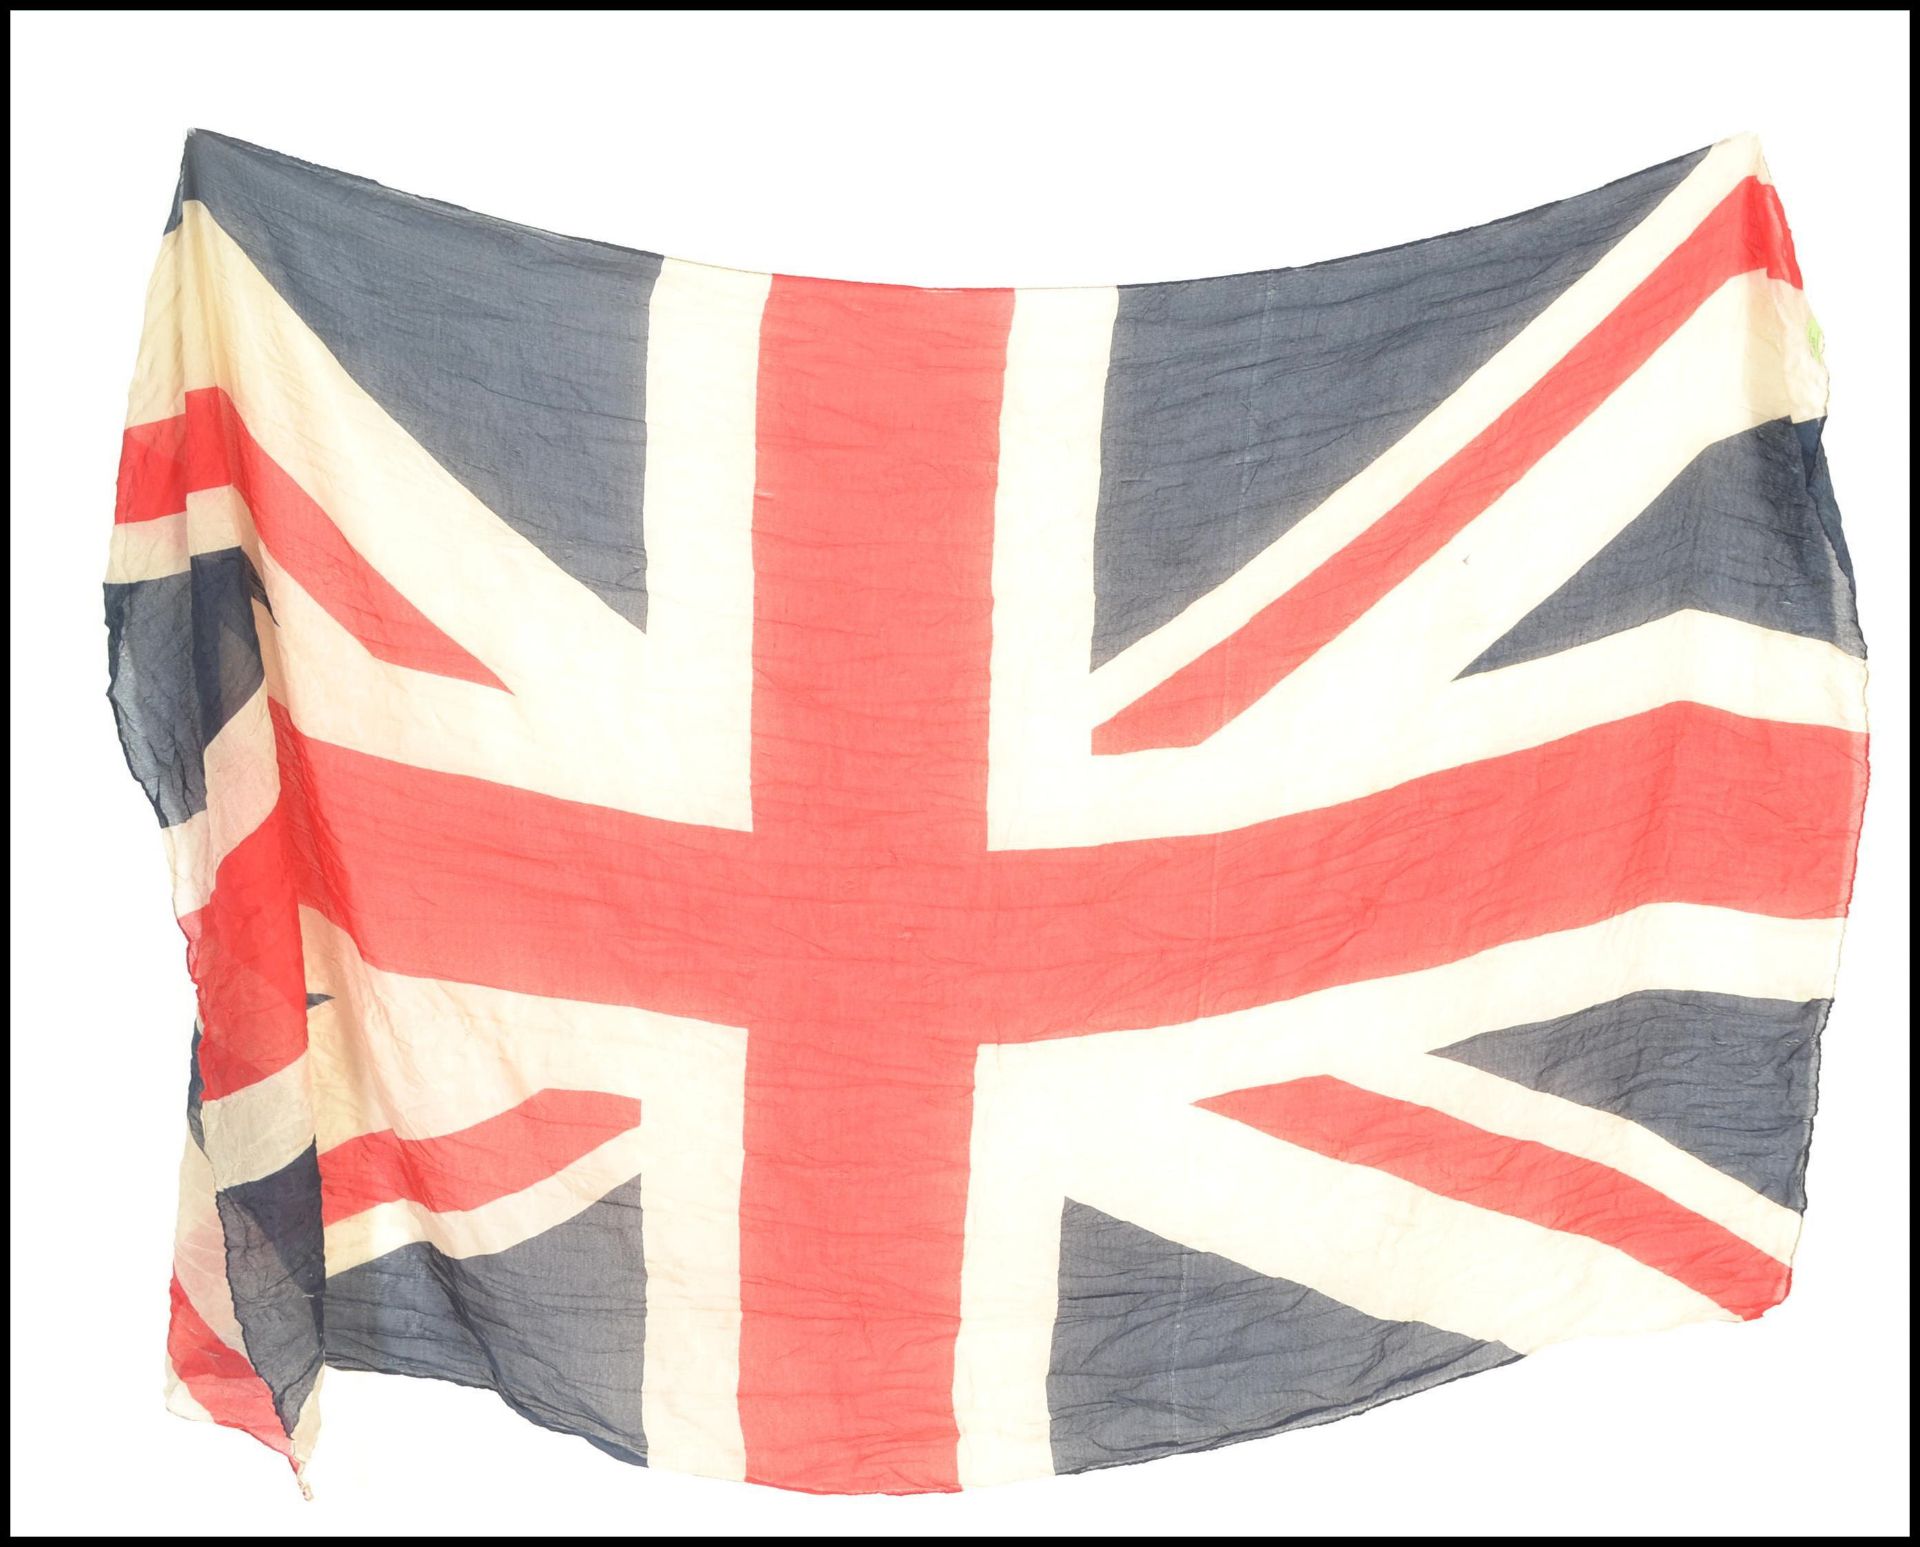 A 20th Century vintage large Union Flag / Union jack flag printed on muslin having stitched seams to